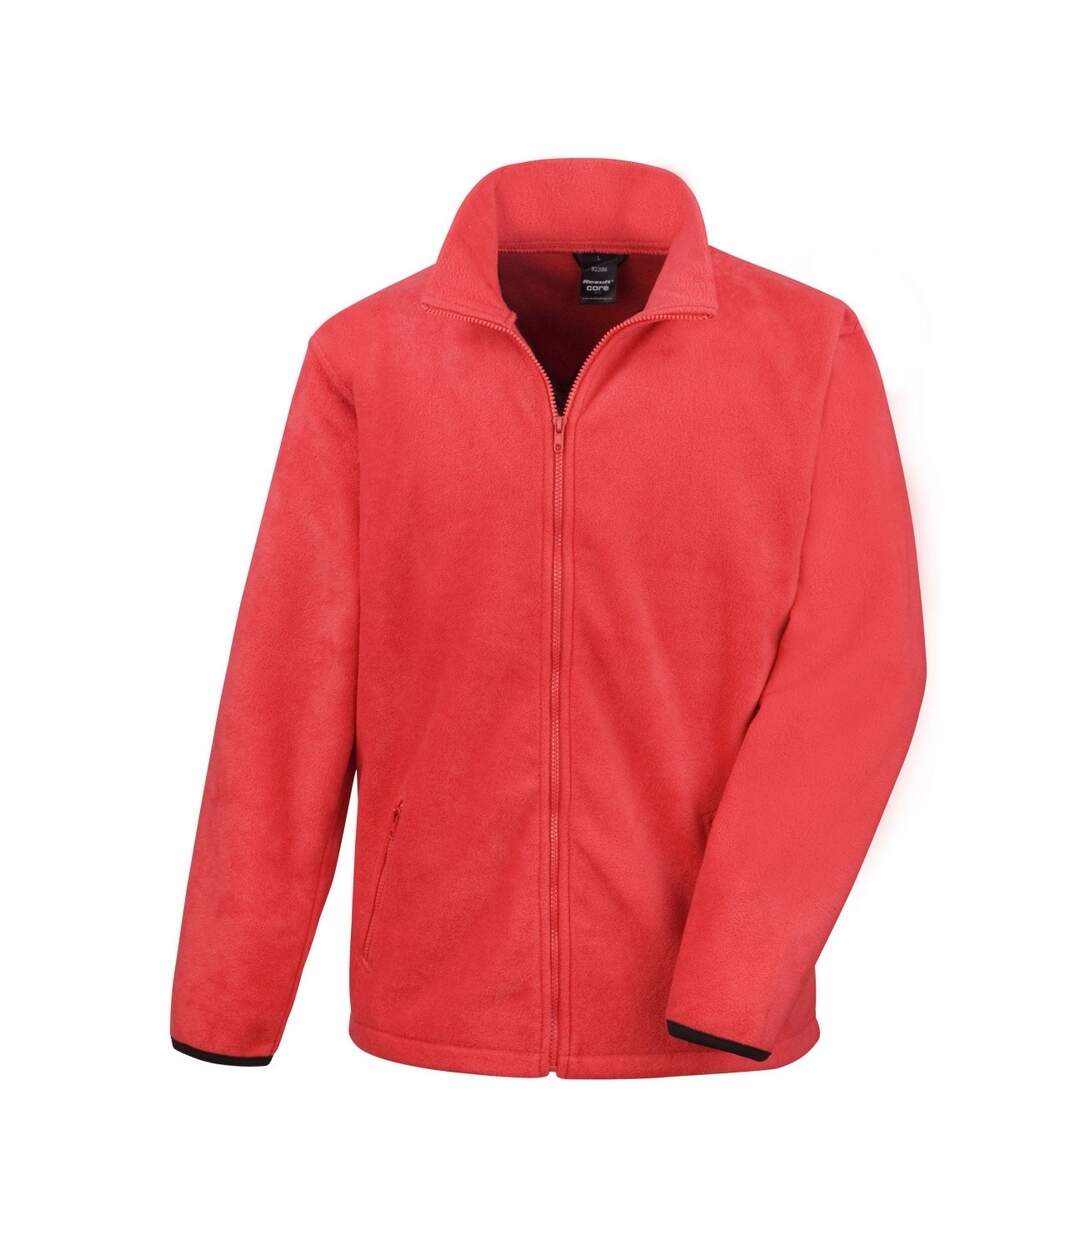 Result Mens Core Fashion Fit Outdoor Fleece Jacket (Flame Red) - UTBC912